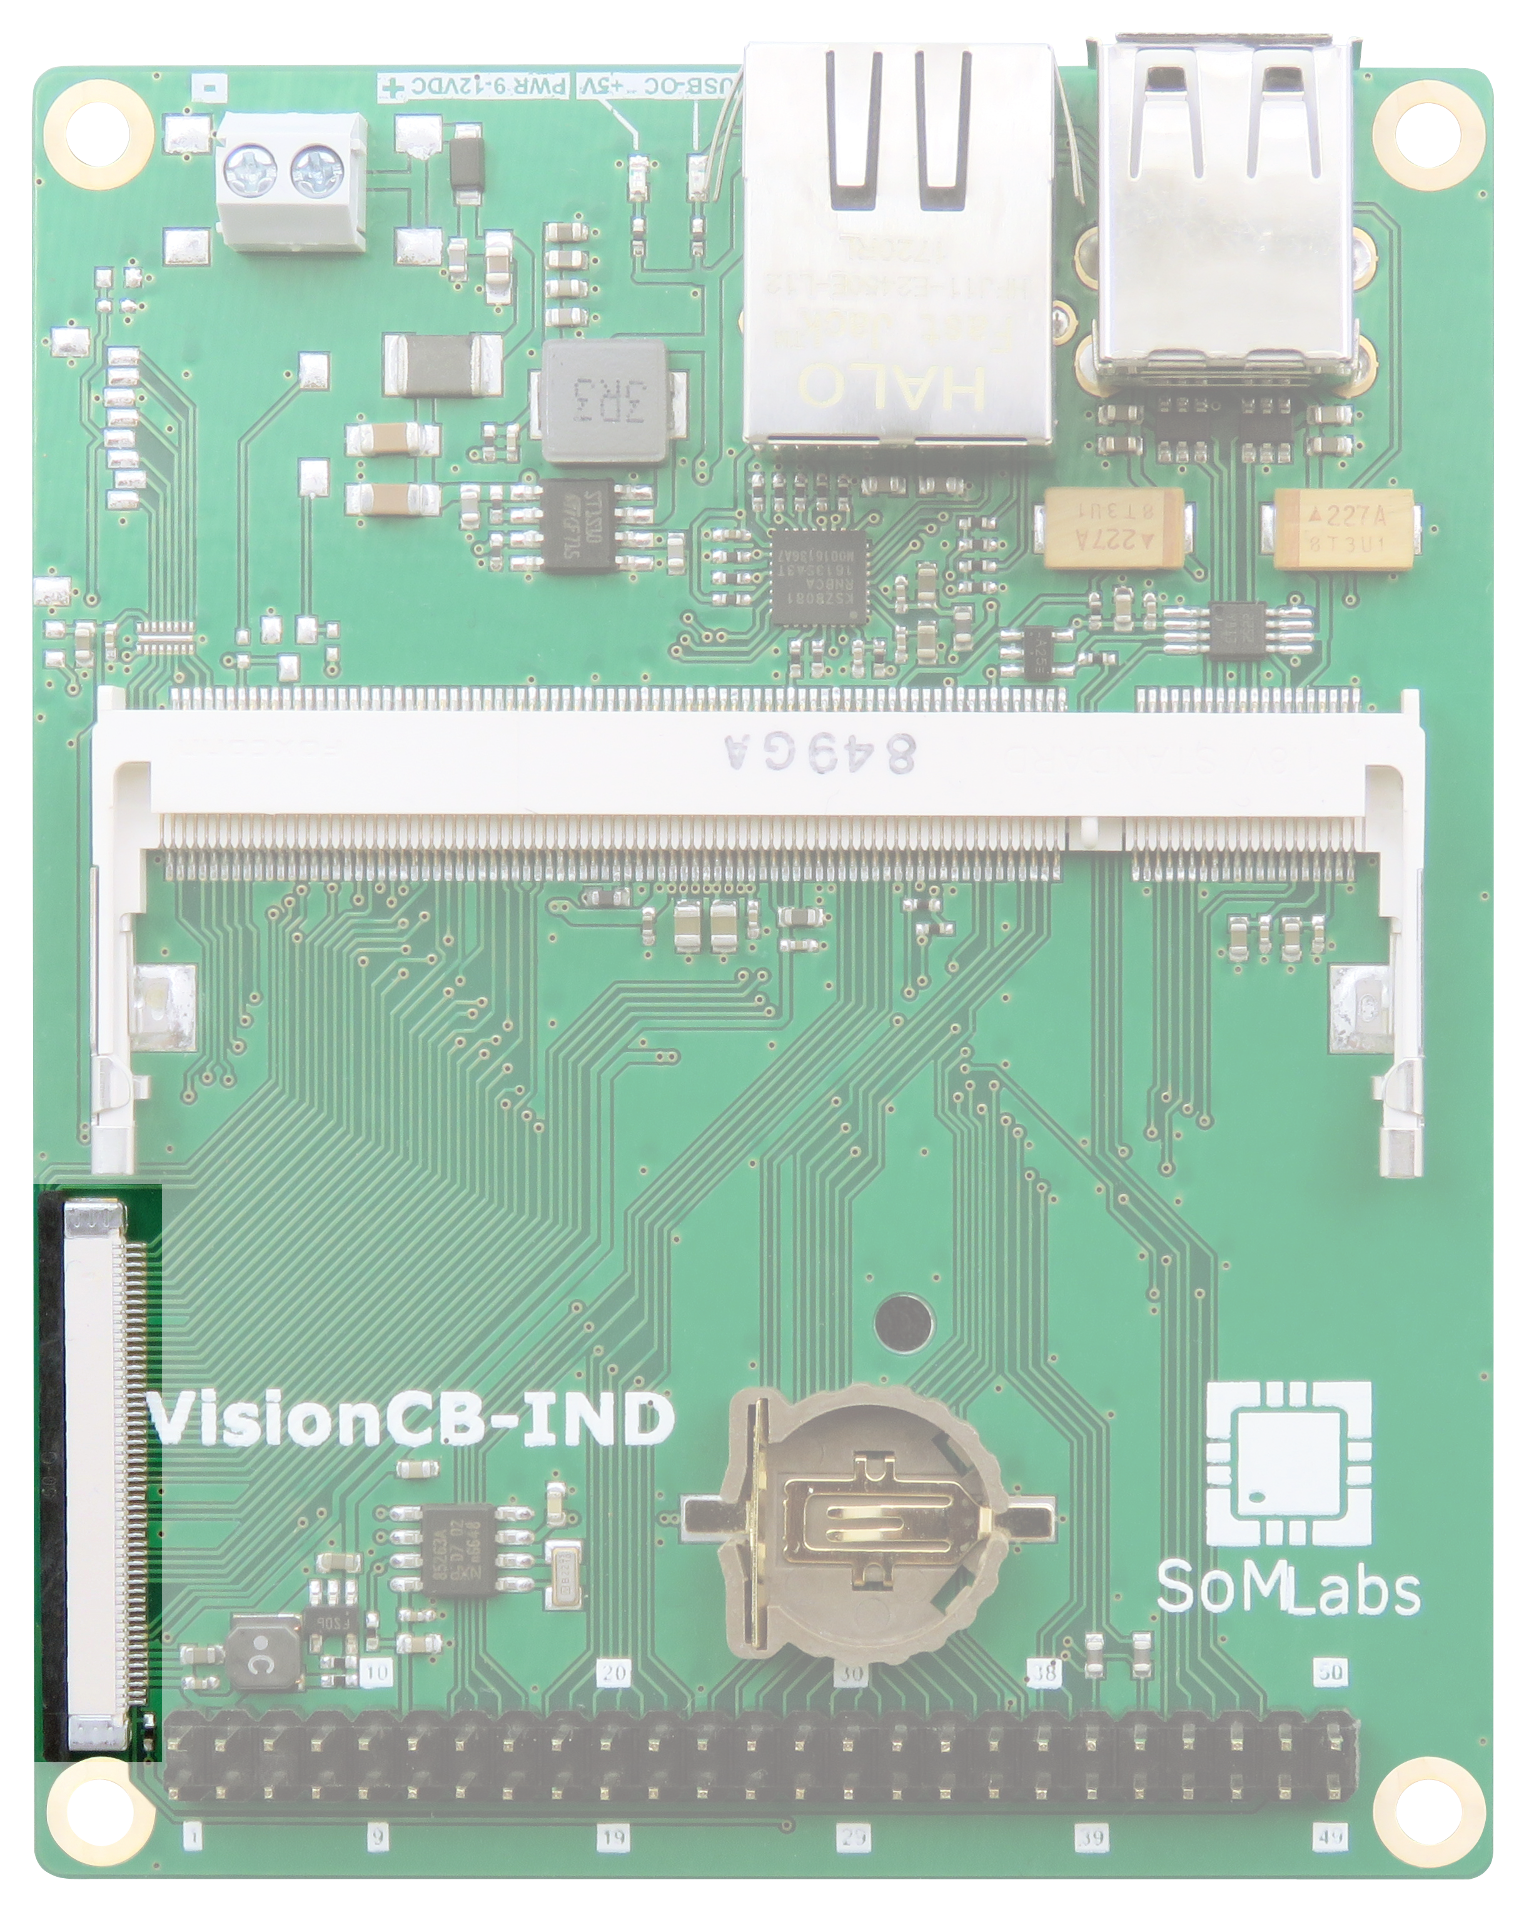 VisionCB-IND-1-4-lcd.png